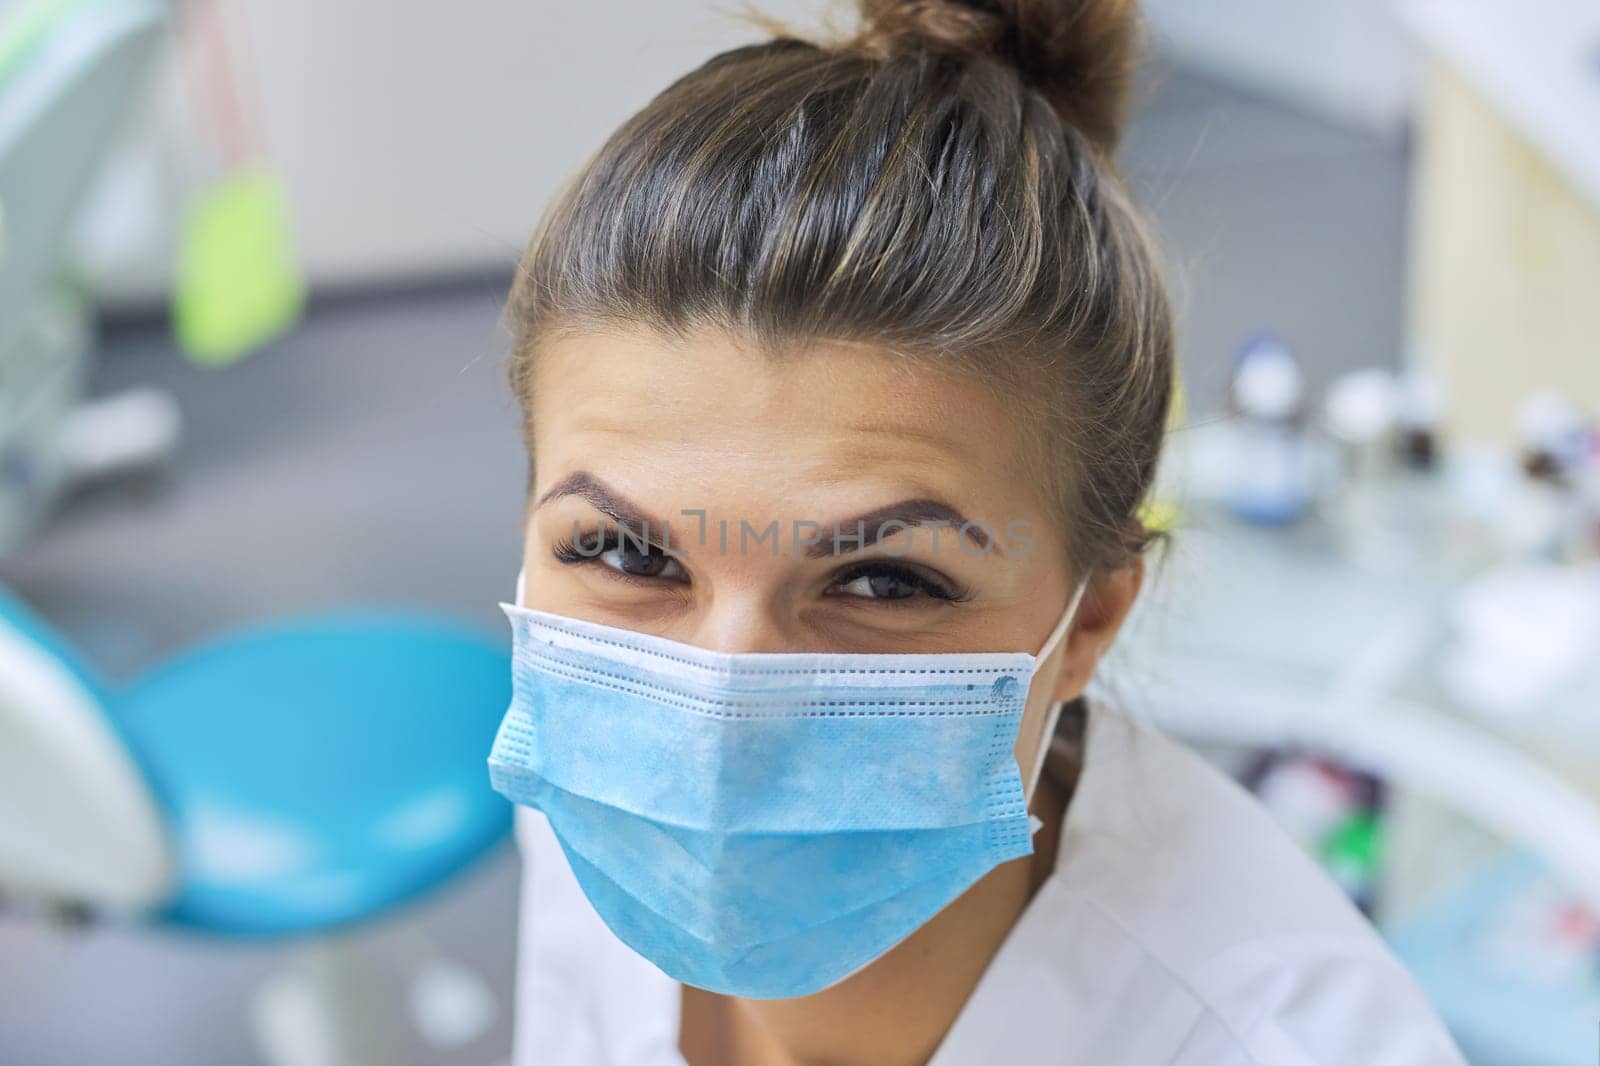 Closeup portrait of smiling female dentist doctor in protective medical mask at workplace dental clinic office, positive face